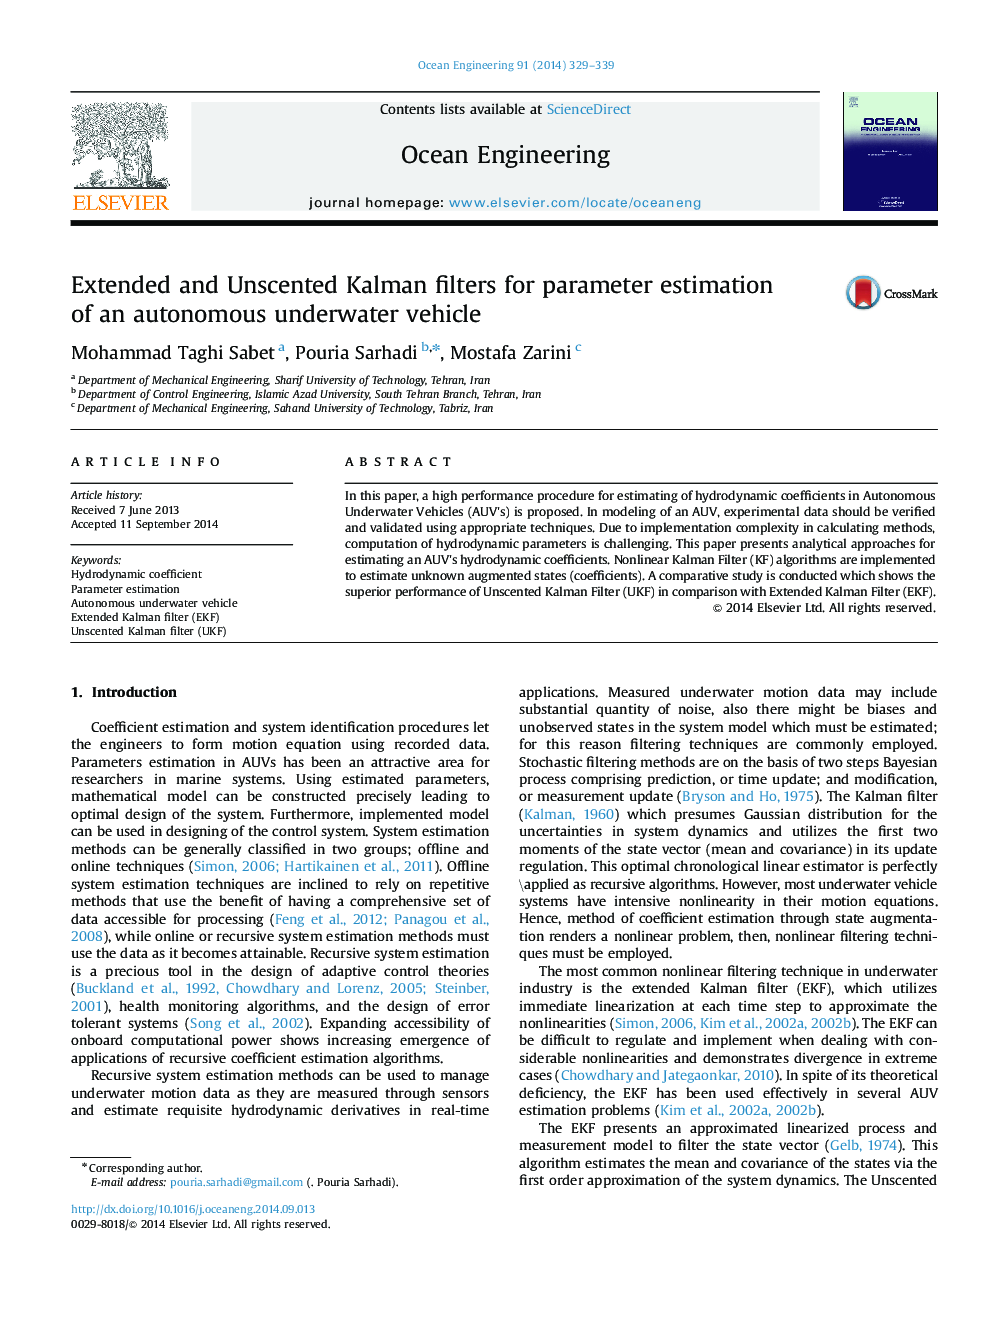 Extended and Unscented Kalman filters for parameter estimation of an autonomous underwater vehicle